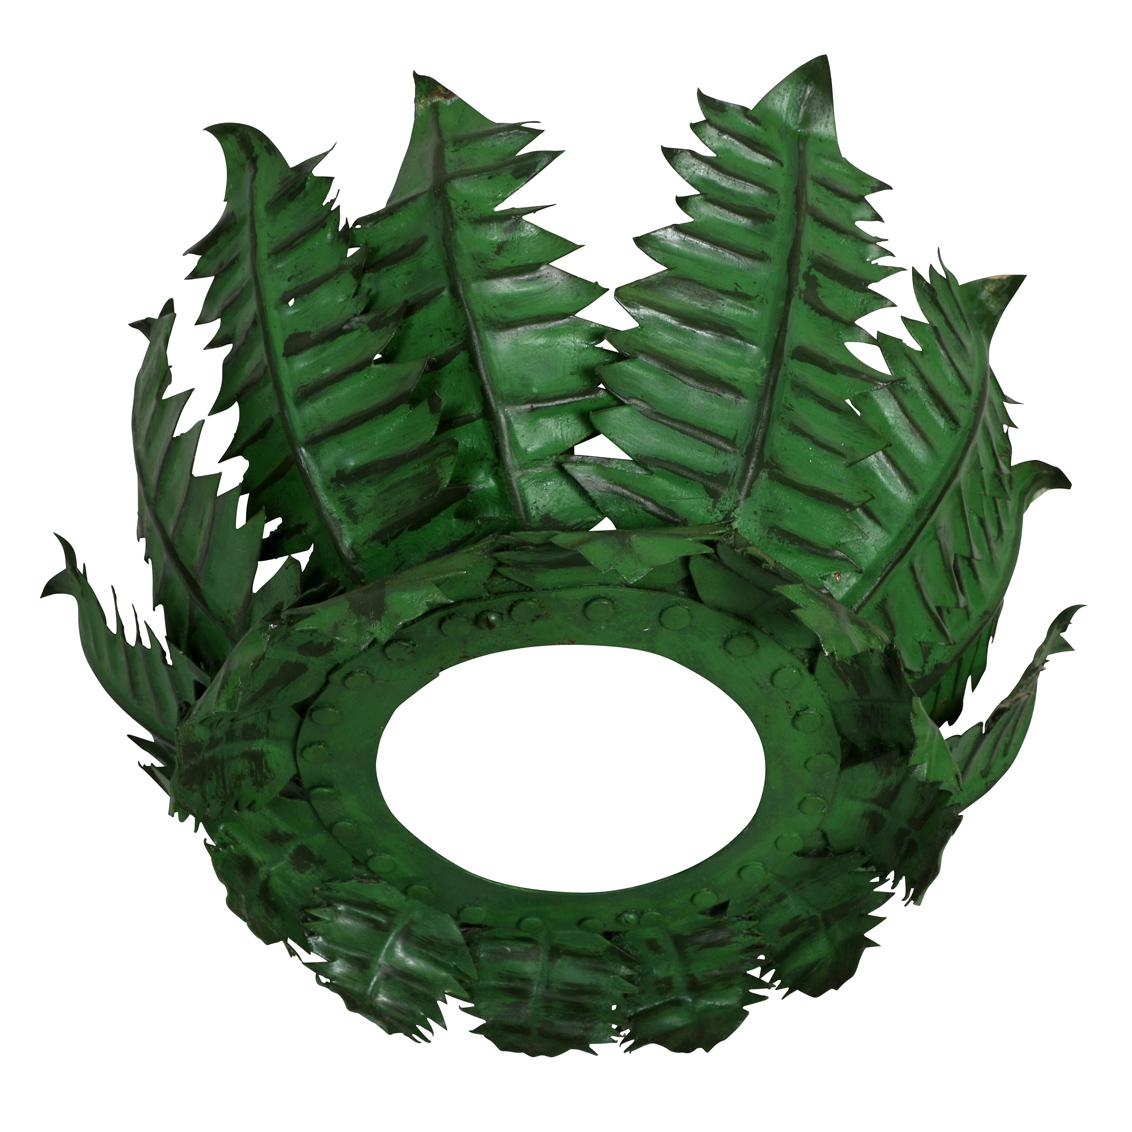 A vintage green fern leaf design semi-flush ceiling mount light. Constructed of painted metal in a circular shape resembling individual fern leaves curved around one another. The semi-flush light can hold two bulbs and the translucent base allows